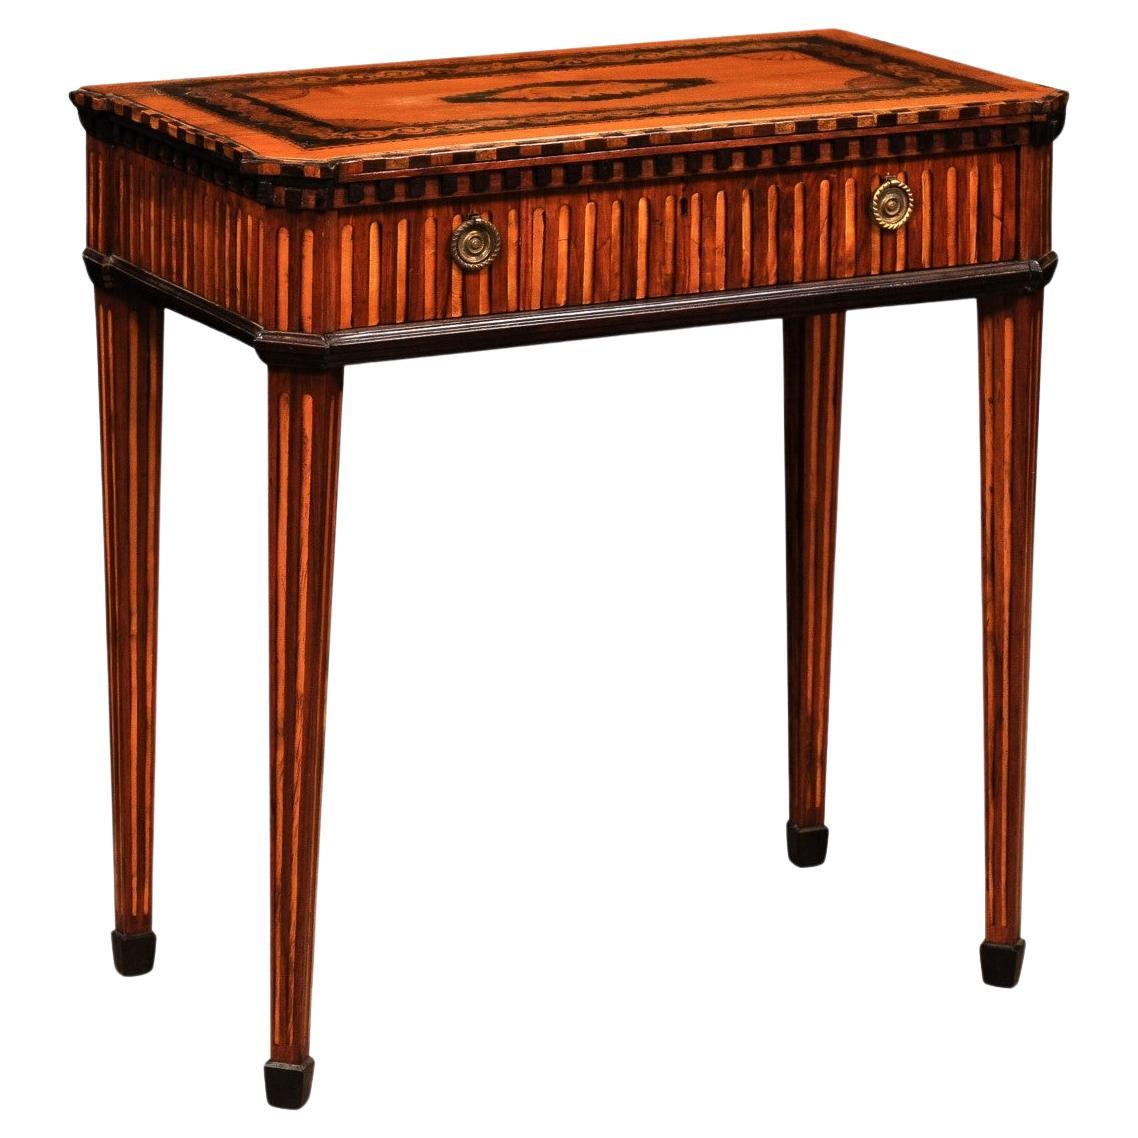 English Satinwood Inlaid Console Table with Shell Marquetry Inlay For Sale